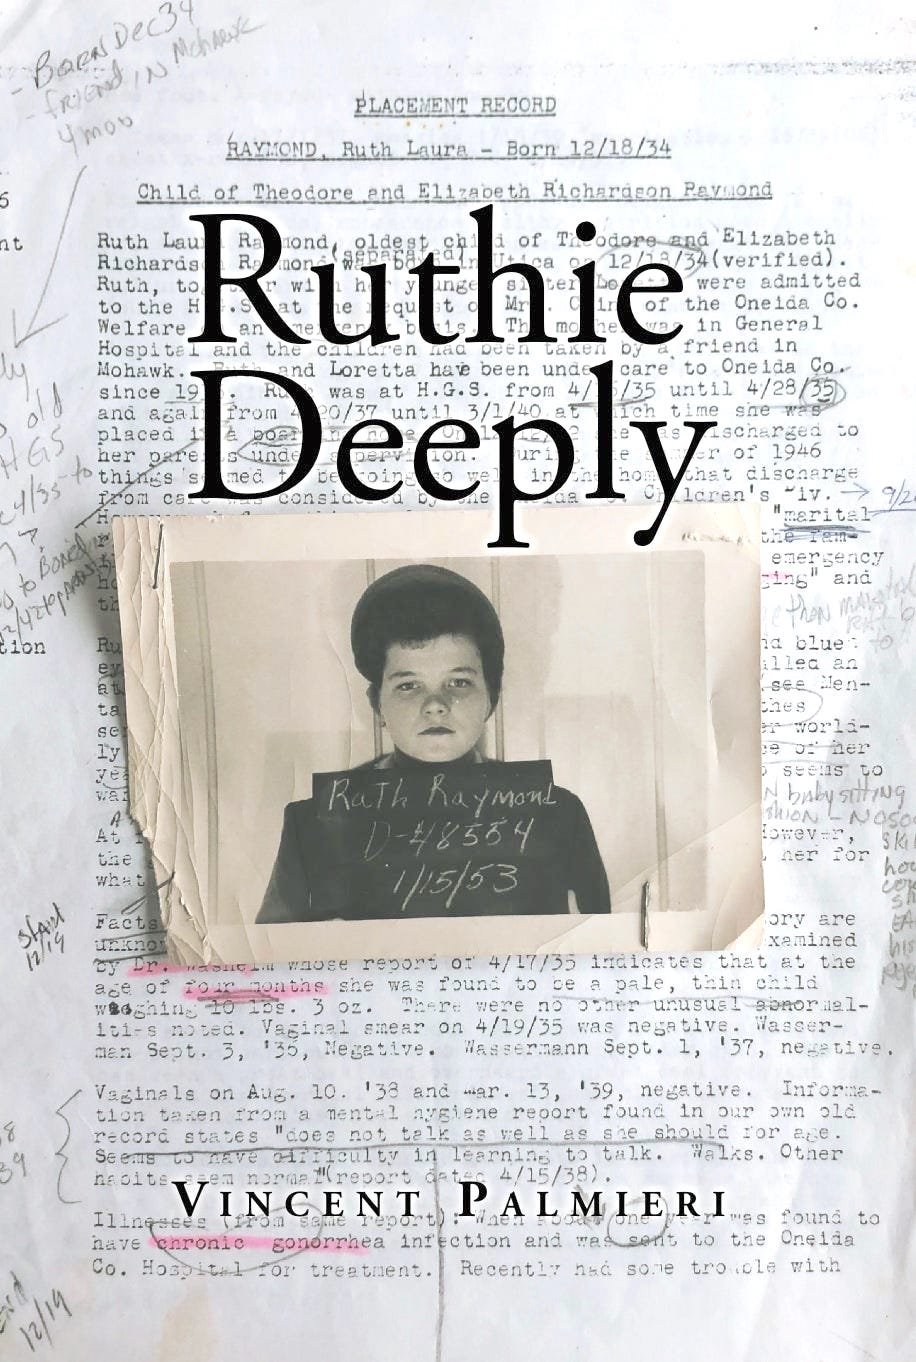 Author Vincent Palmieri and Ruth Morgan will discuss his book, “Ruthie Deeply,” and her story of overcoming difficulties in the state’s foster care system. Copies of the book will be available for purchase and signing after the talk.